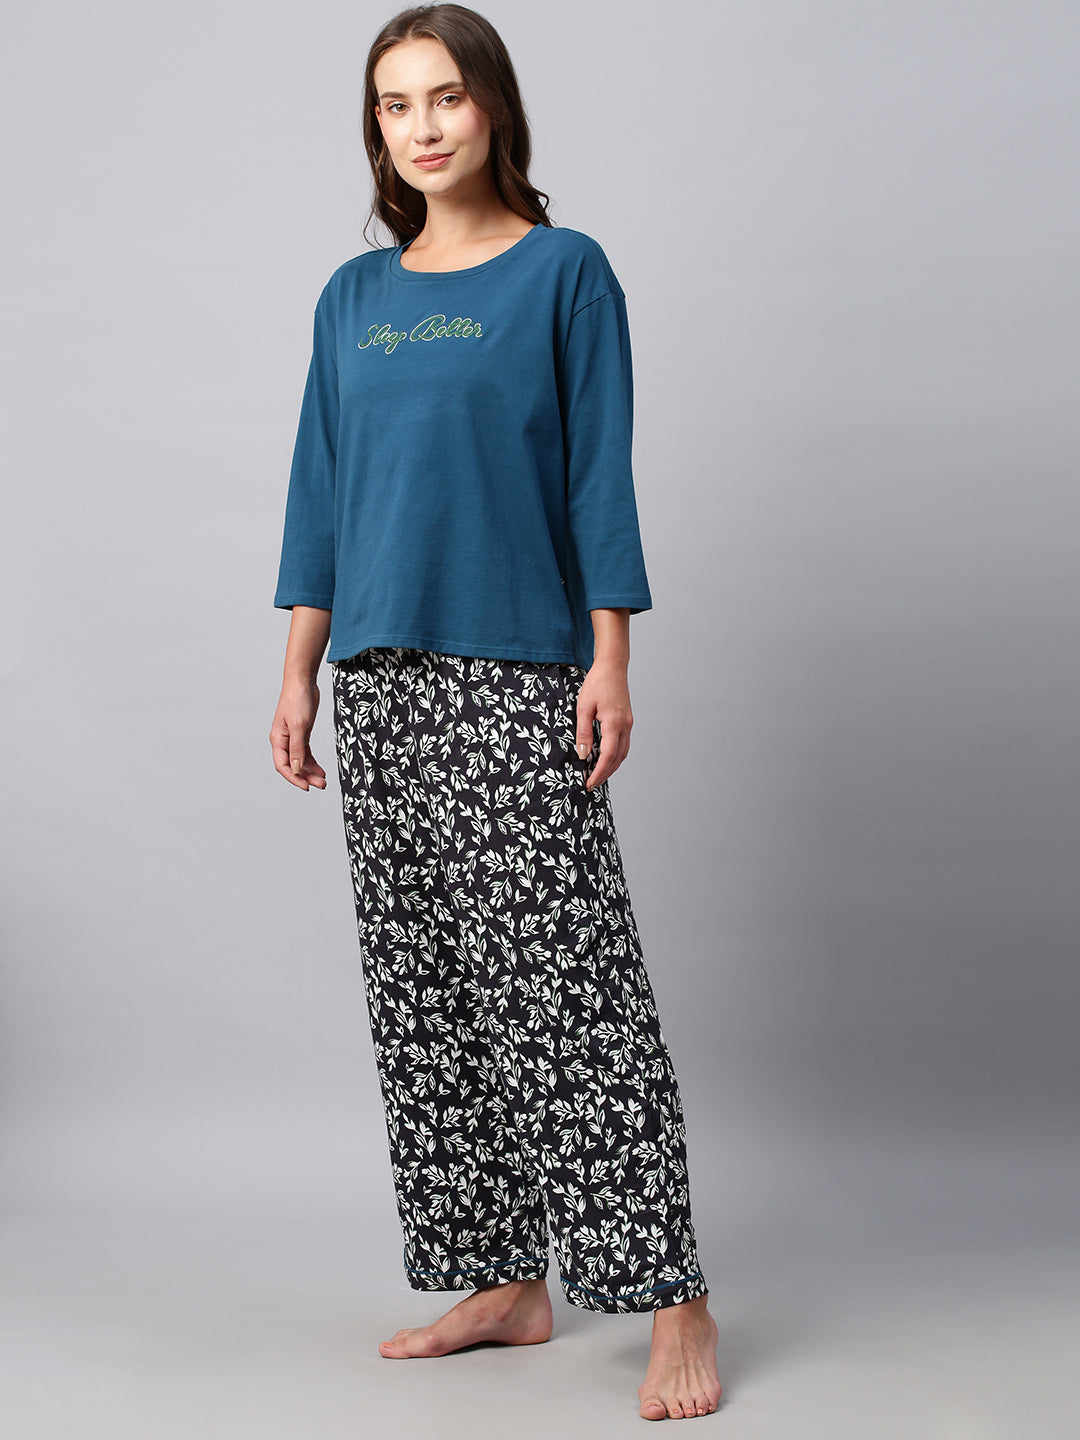 Embroidered Drop Shoulder Tee With  Printed Rayon Pj'S